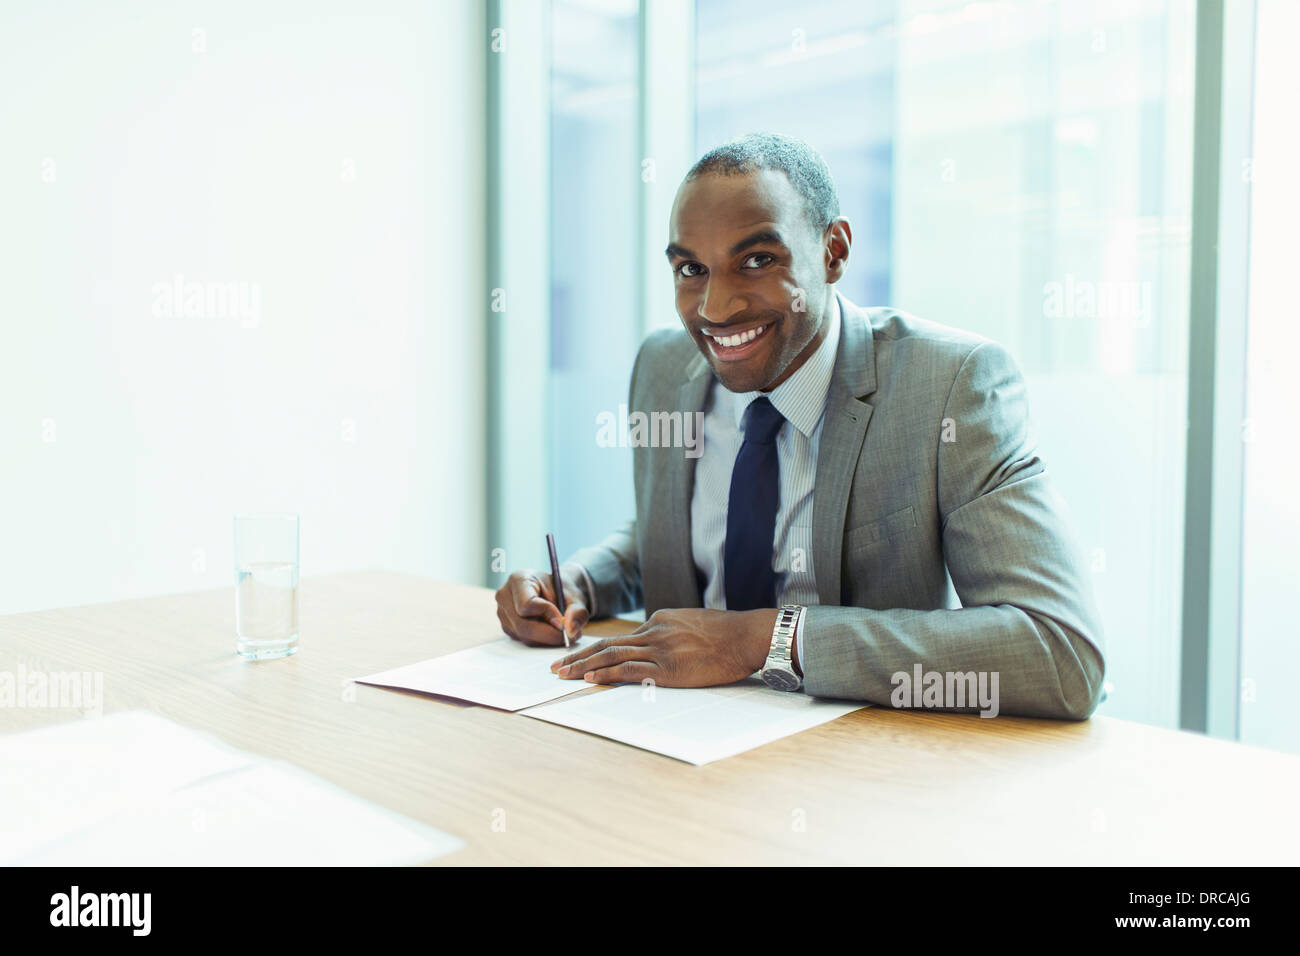 Businessman smiling at conference table Stock Photo